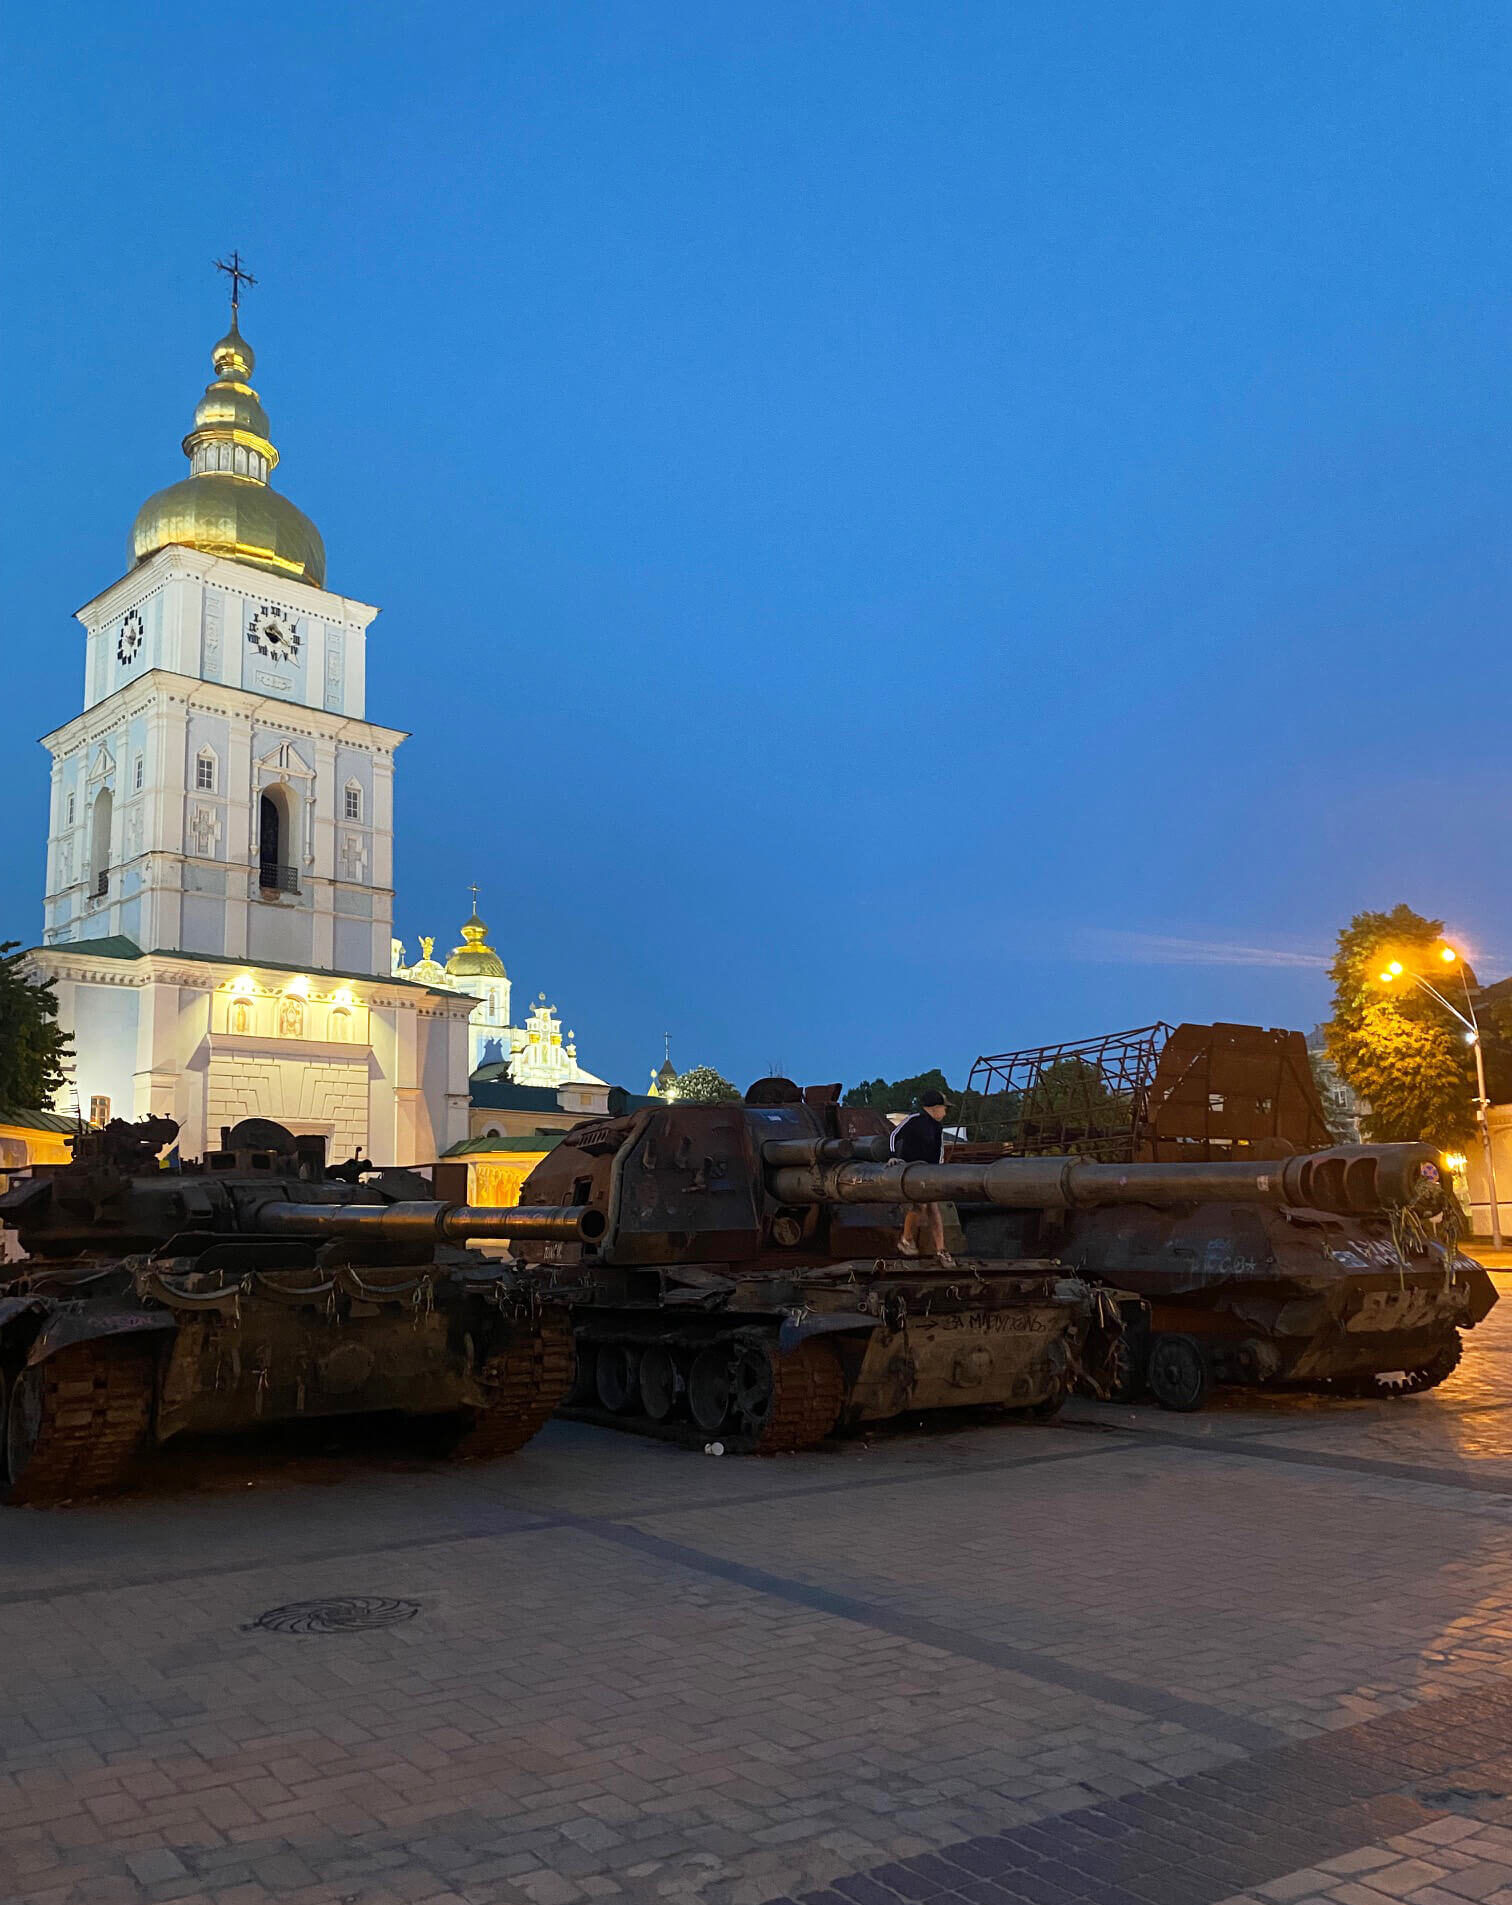 A young boy plays on a set of partially destroyed tanks placed in the center of Mykhailivska Square, Kyiv.